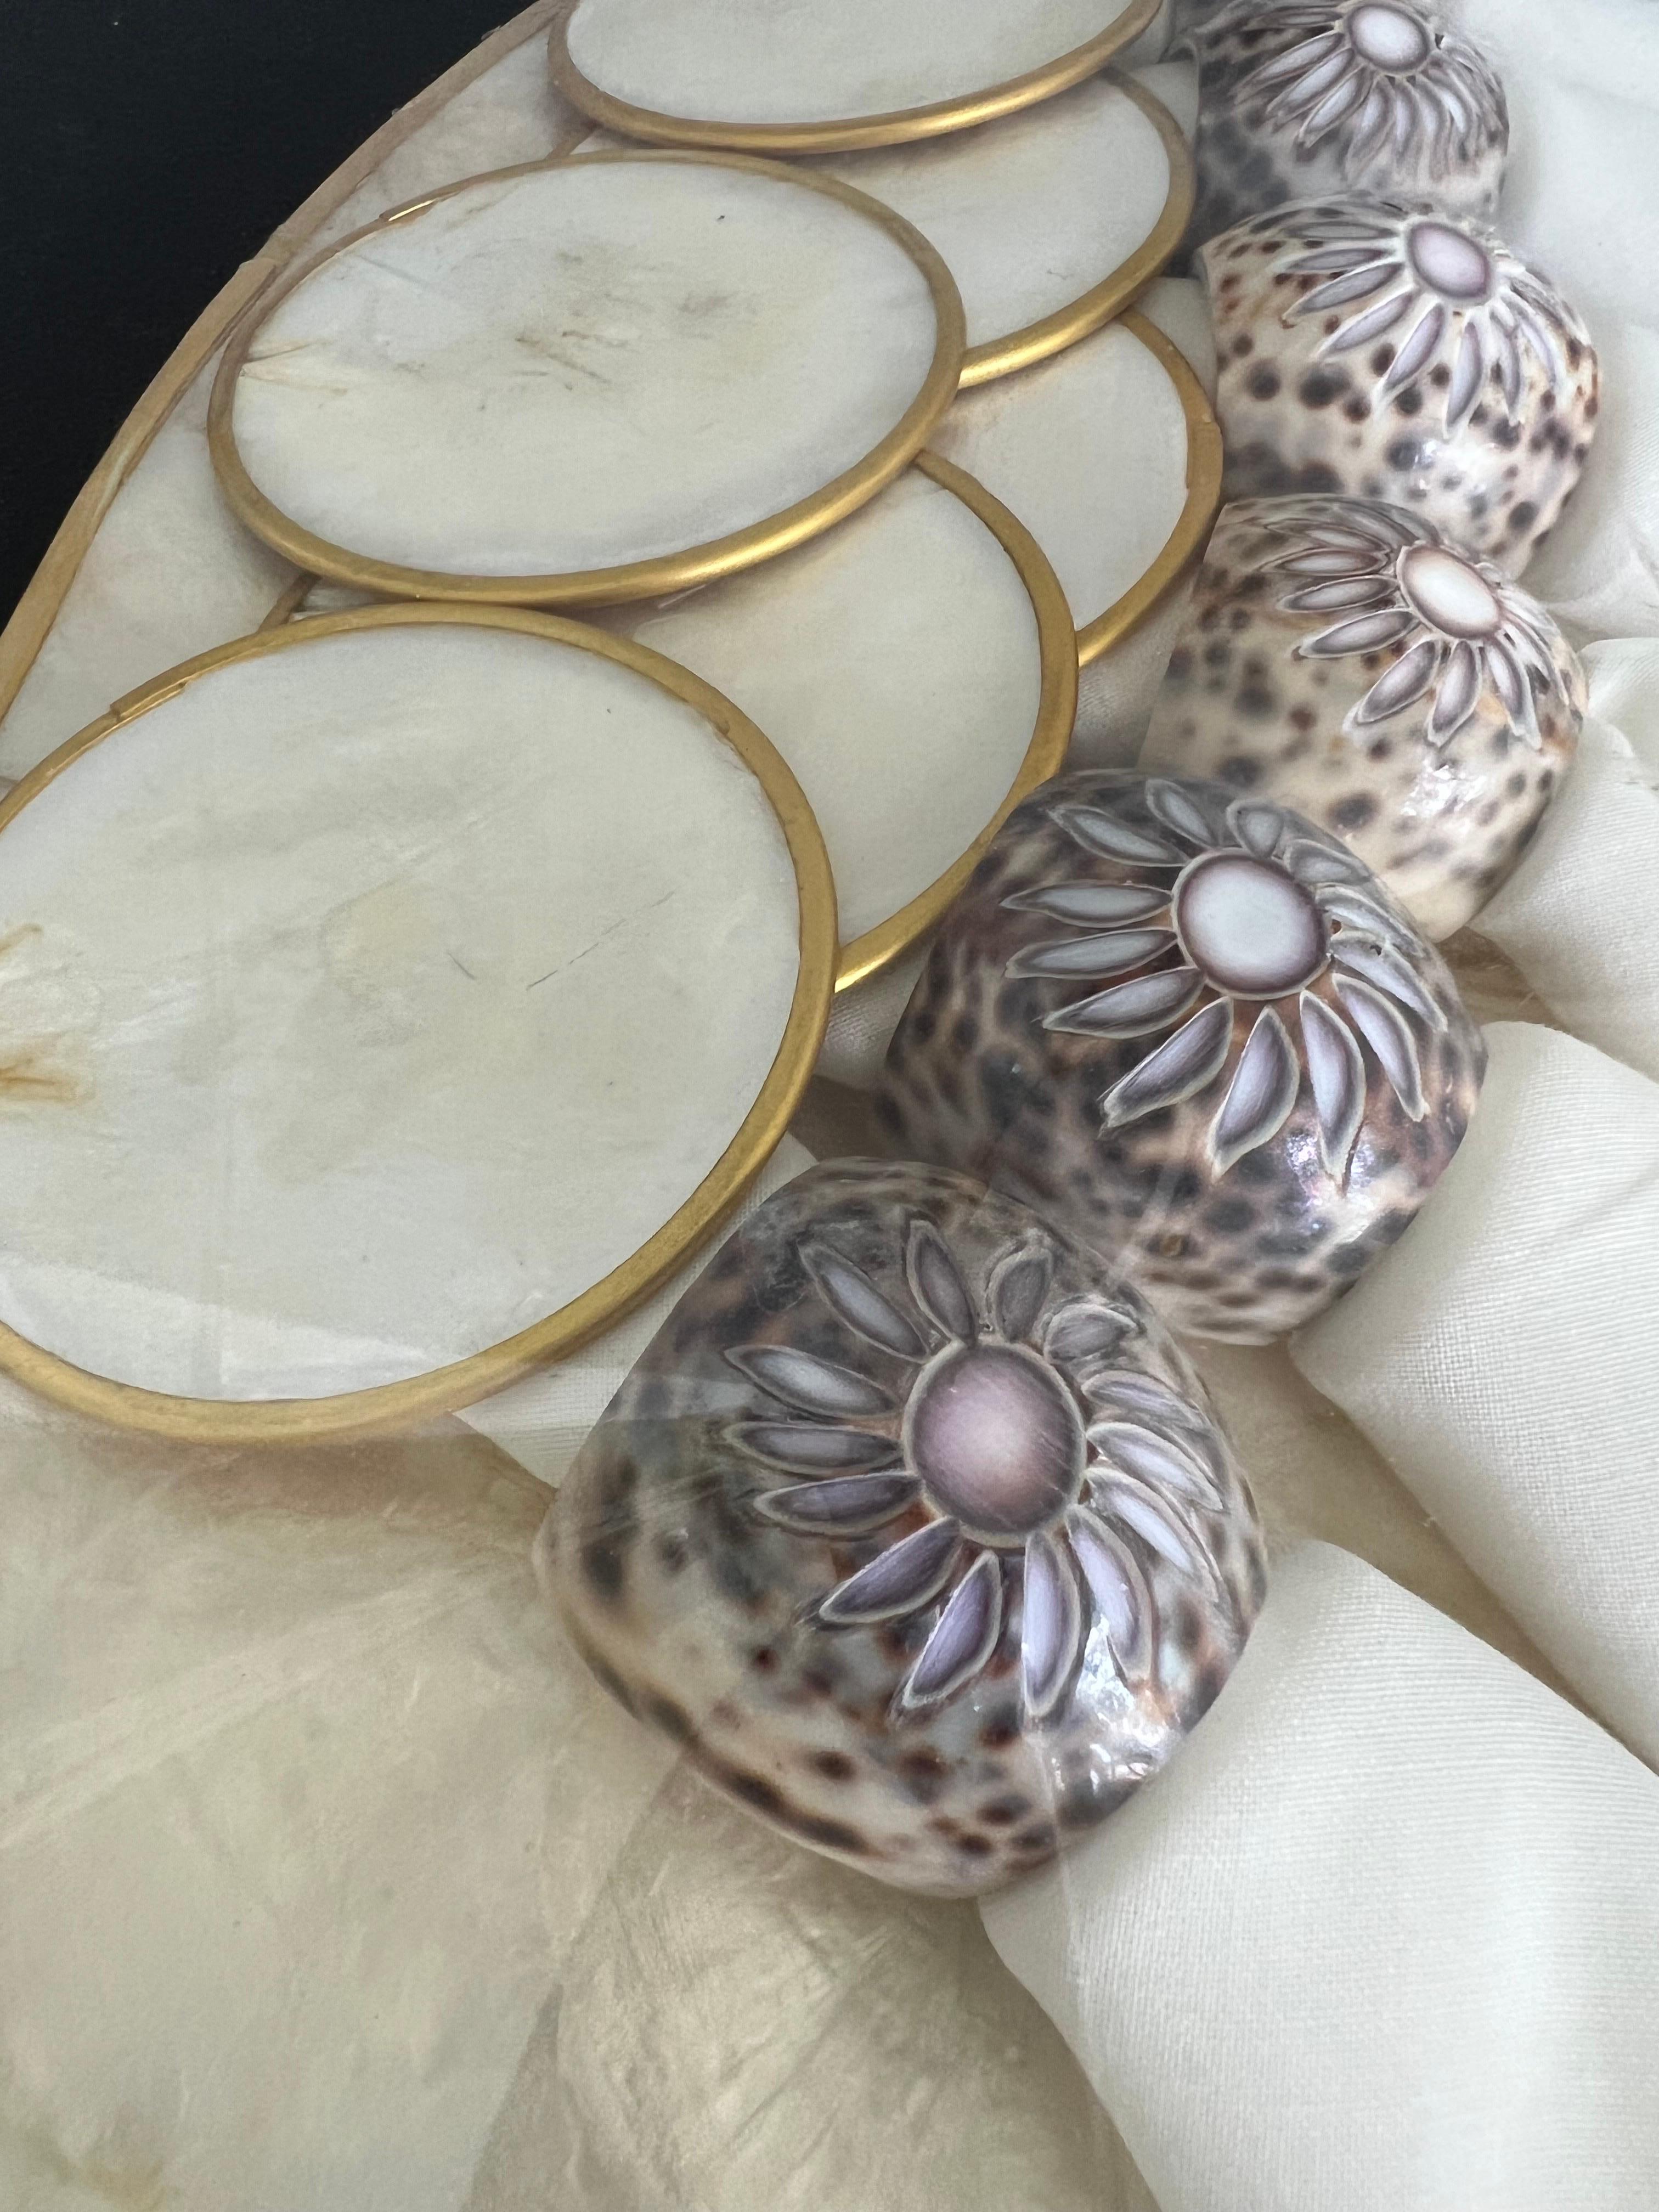 Still sealed in the original shrink wrap! This gorgeous vintage set of Capiz shell placemats, coasters, and napkin rings fashioned from Tiger Leopard Cowrie shells and matching cream-coloured napkins, comes straight from 1970s Philippines.Mint